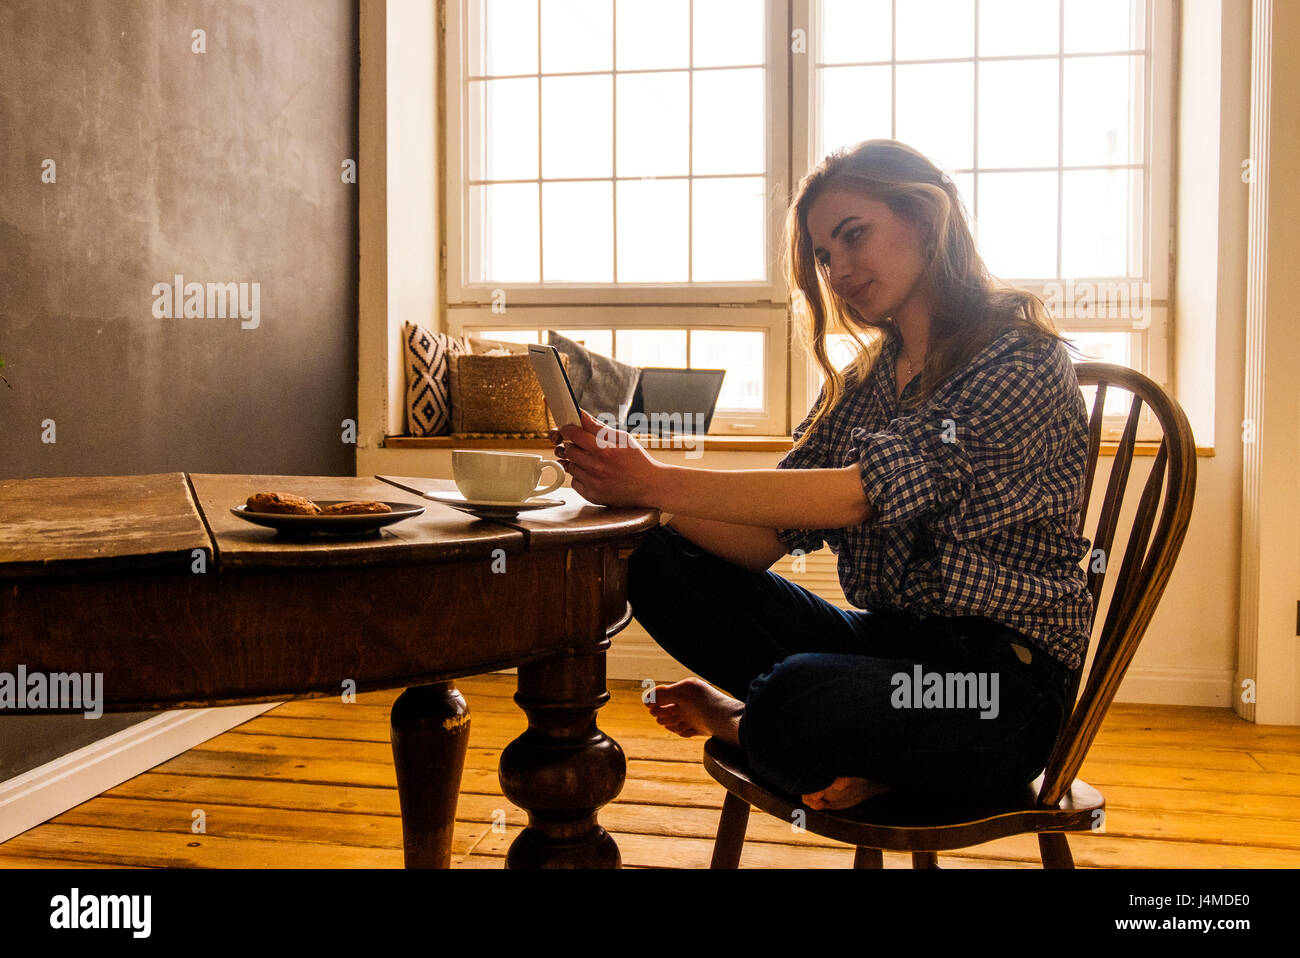 Caucasian woman reading digital tablet at table Stock Photo